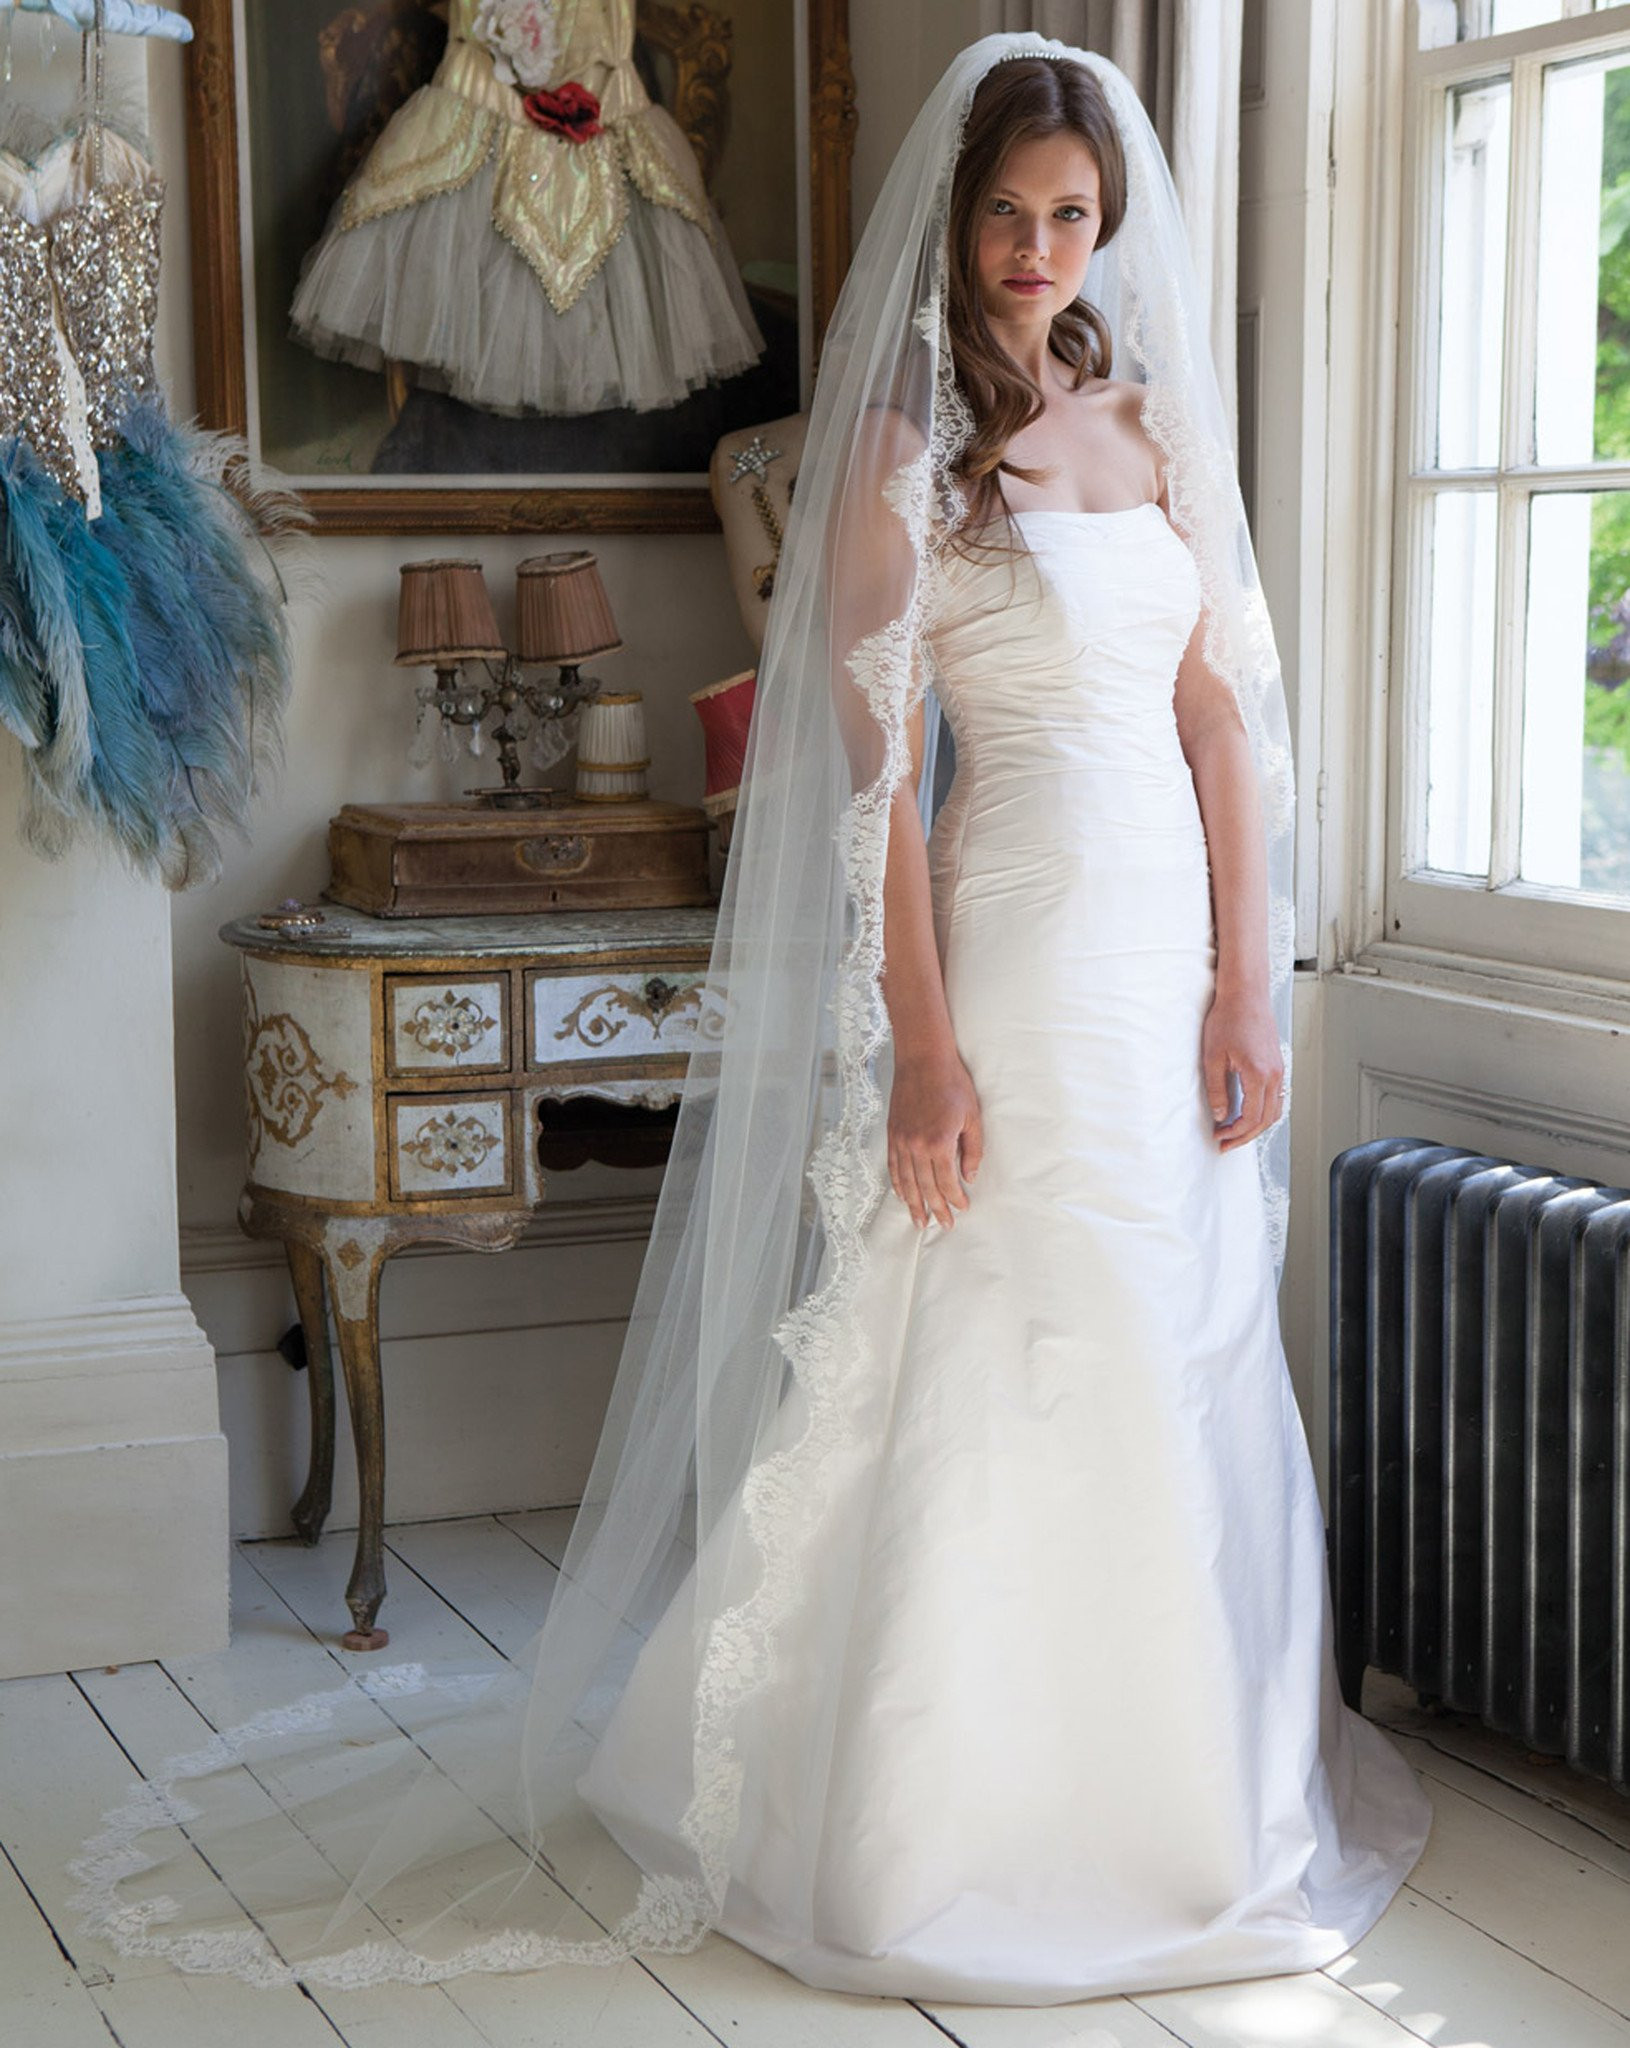 How To Make A Wedding Veil With Lace Trim
 Veil train length with chantilly lace trim Spellbinder